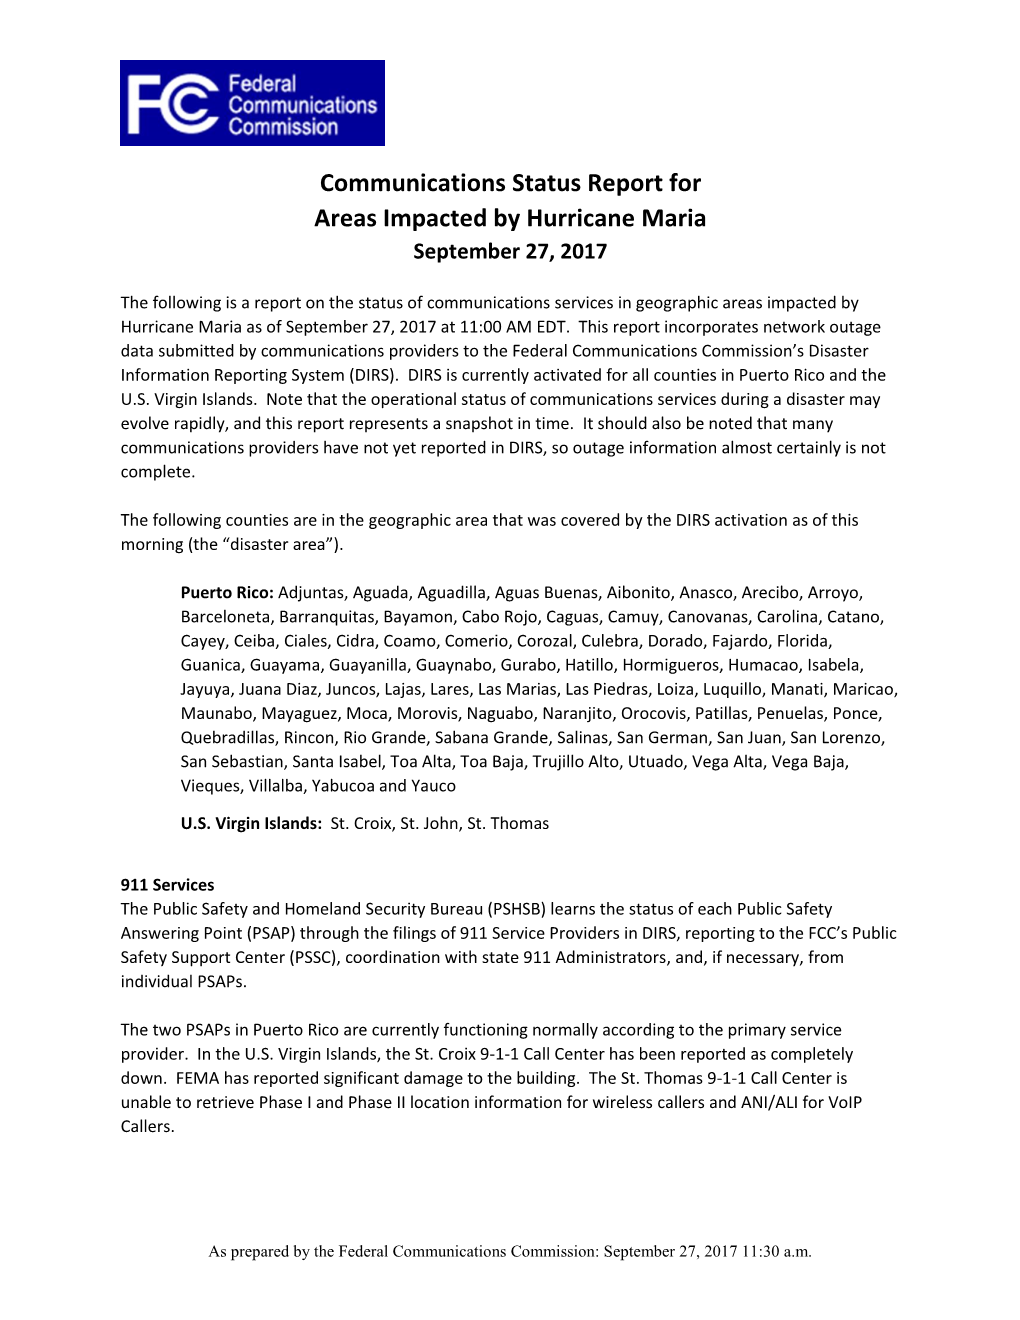 Communications Status Report for Areas Impacted by Hurricane Maria September 27, 2017